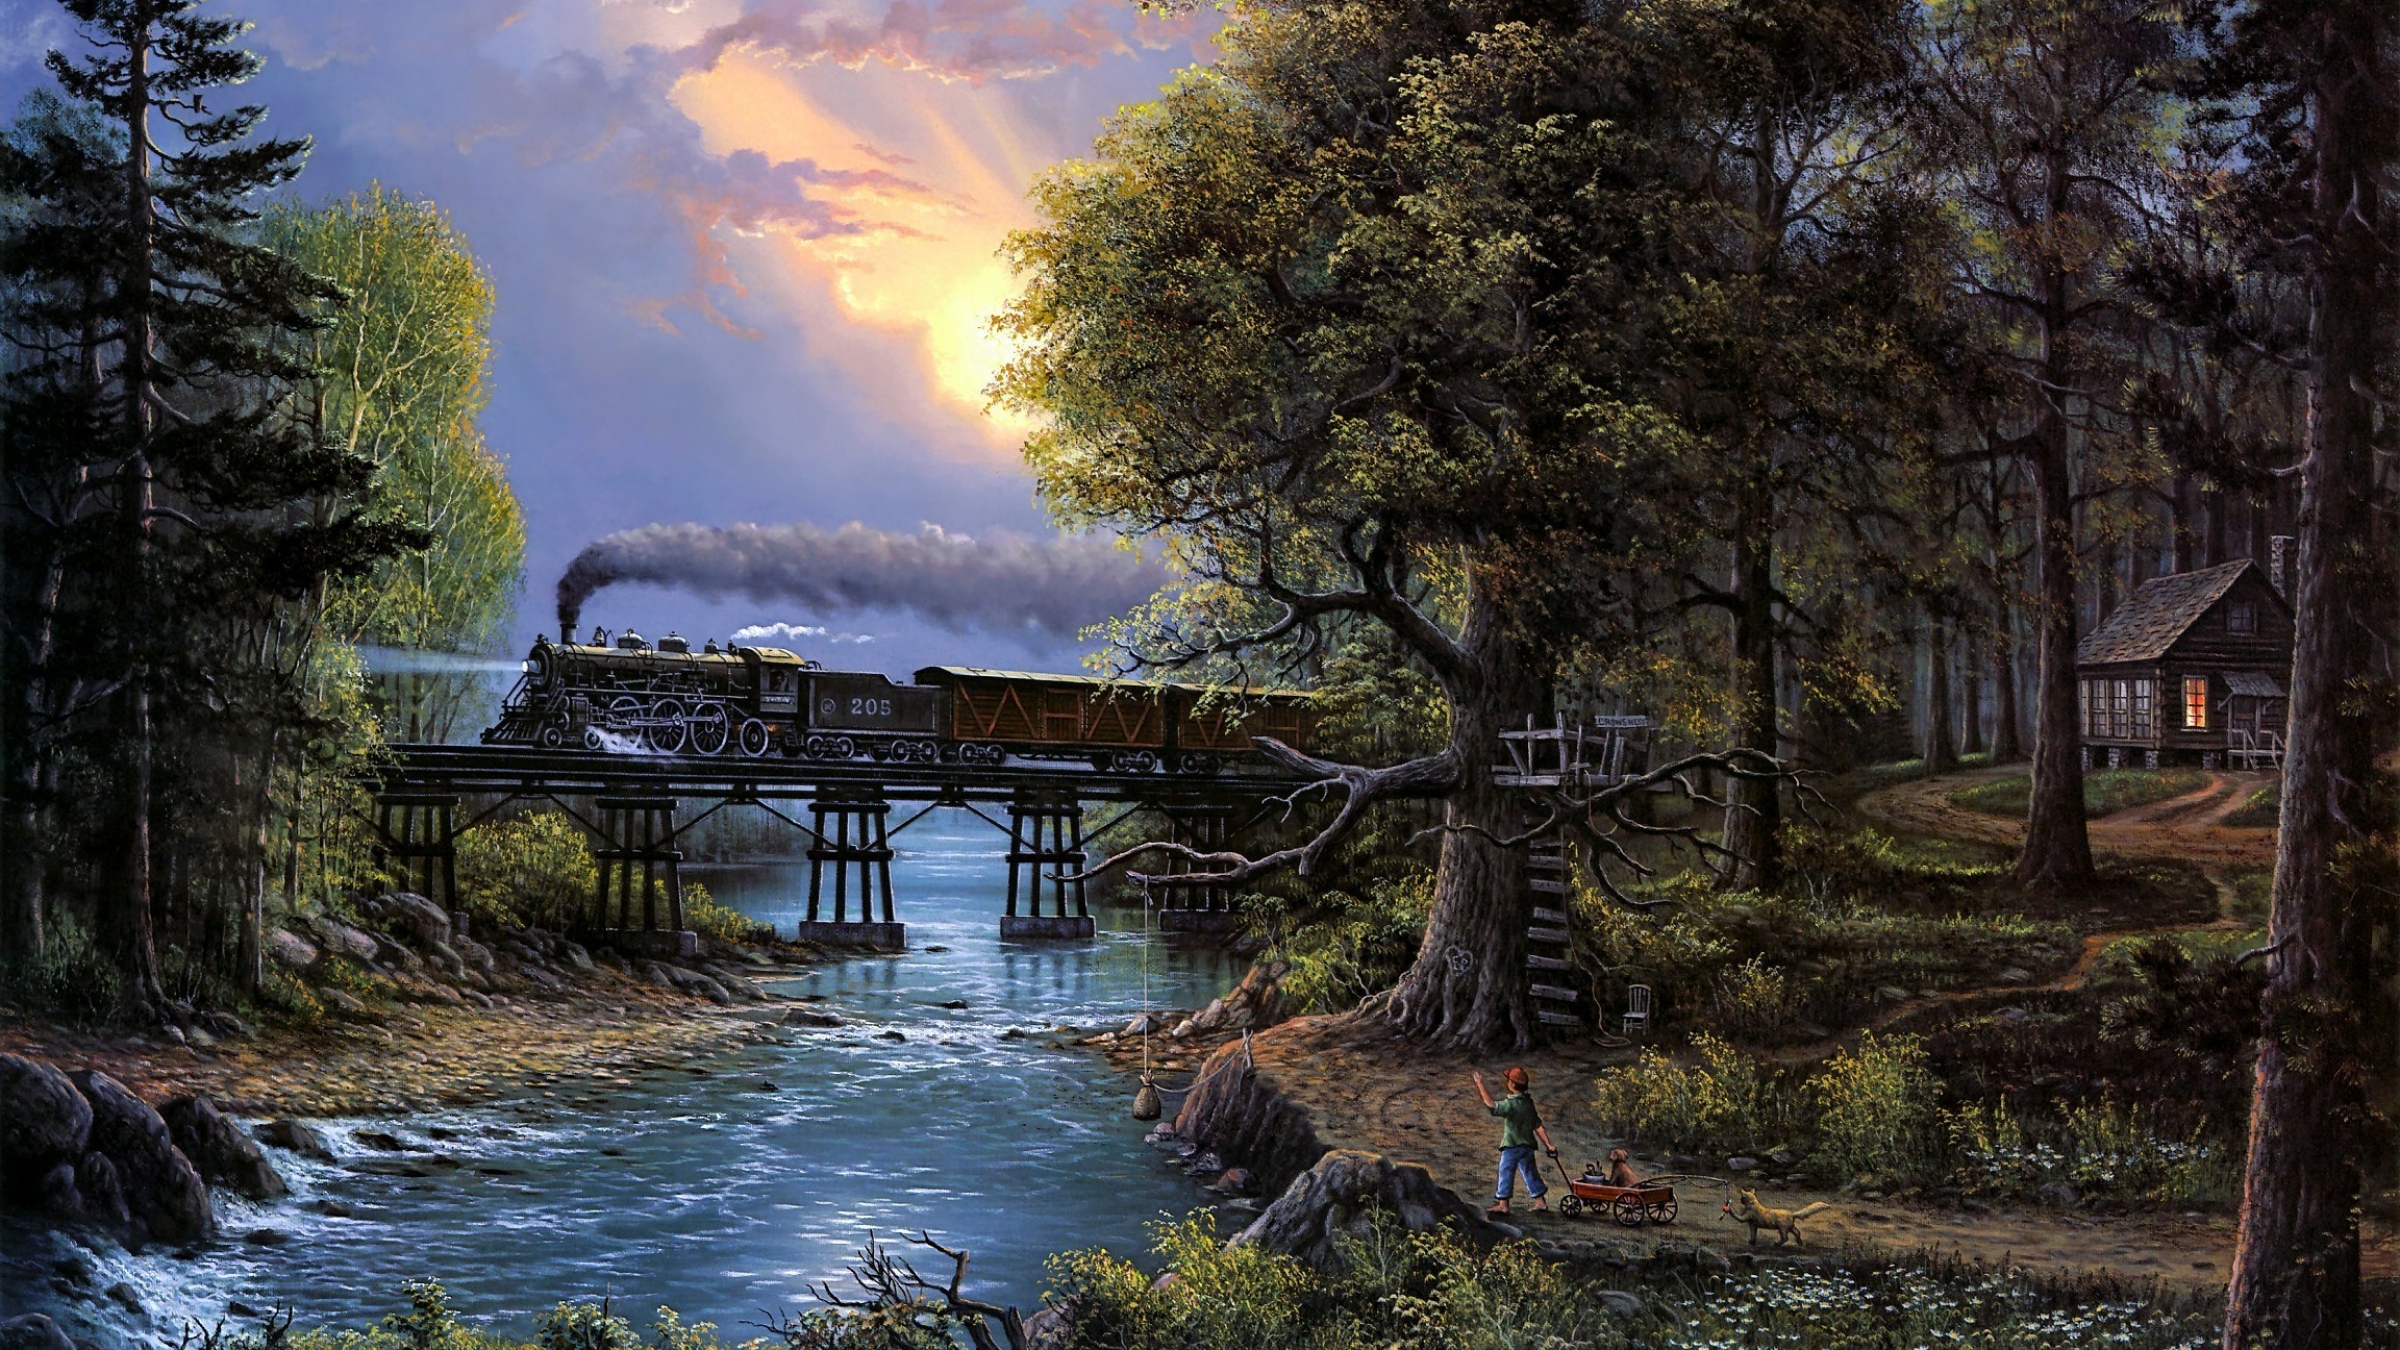 Train Painting Artists Steam Locomotive Water Forest Trees Cabin Sunset Glow 2400x1350